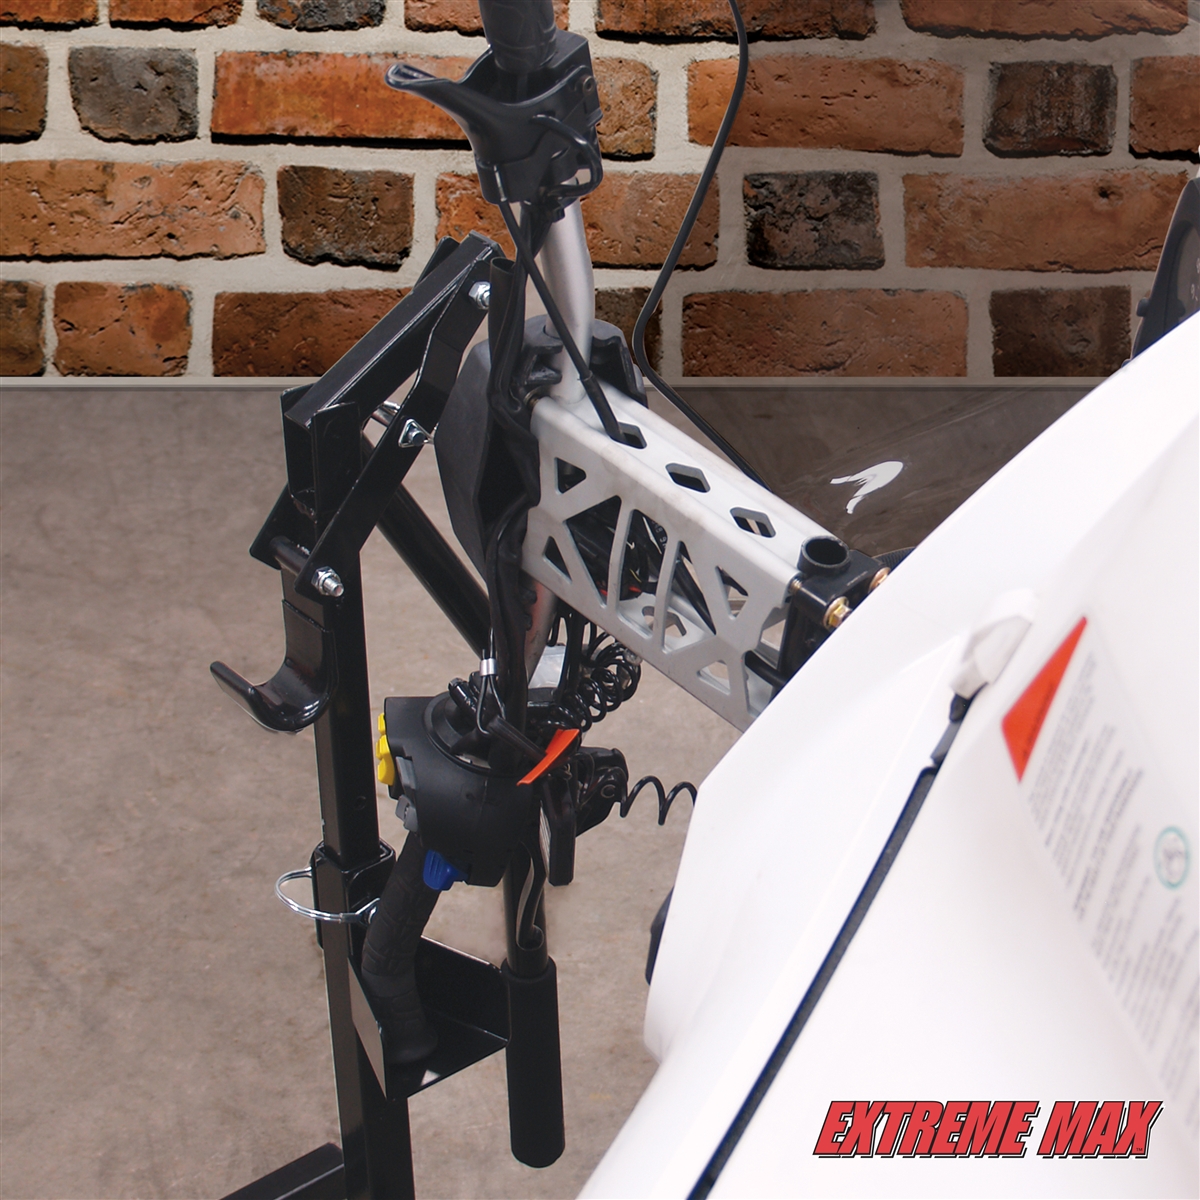 Extreme Max 5001.5097 Lever Lift Stand with Handlebar Cup